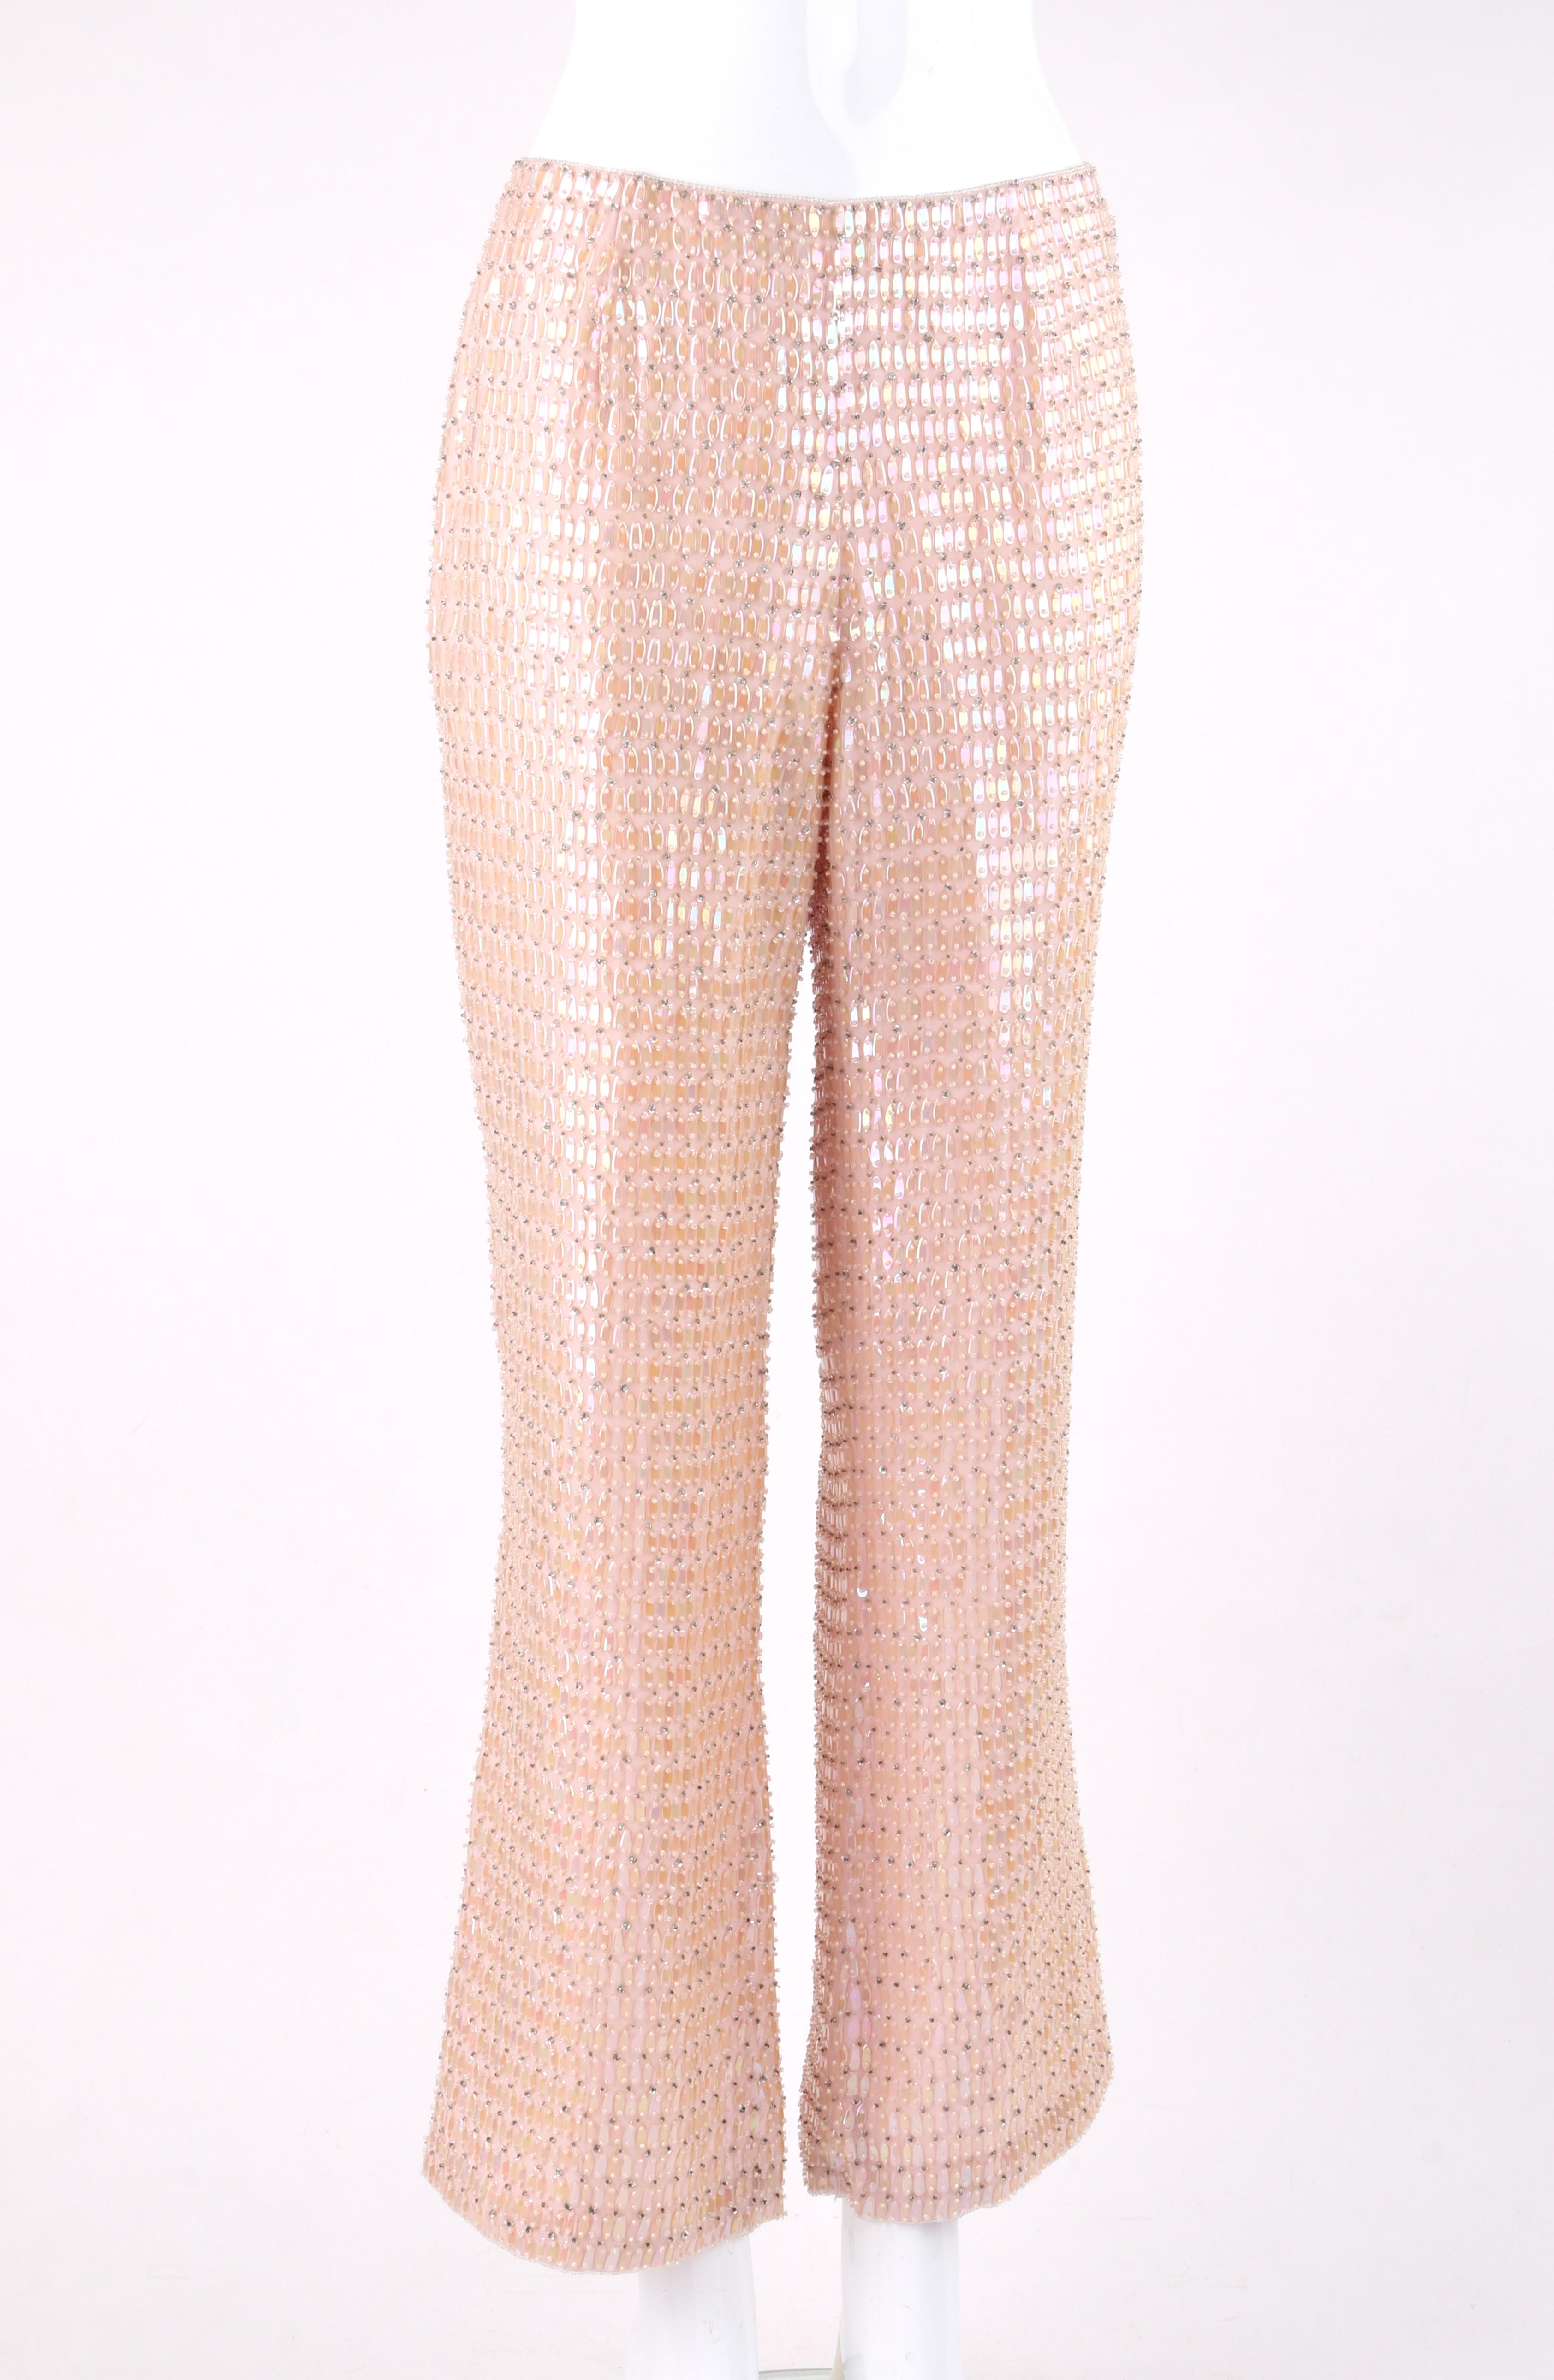 ESCADA Light Pink Silk Bead & Sequin Embellished Shimmer Wide Leg Flare Pants

Brand / Manufacturer: Escada
Style: Fully beaded straight wide leg flat front slack pant
Color(s): Shades of pink and silver
Lined: Yes
Marked Fabric Content: 100%